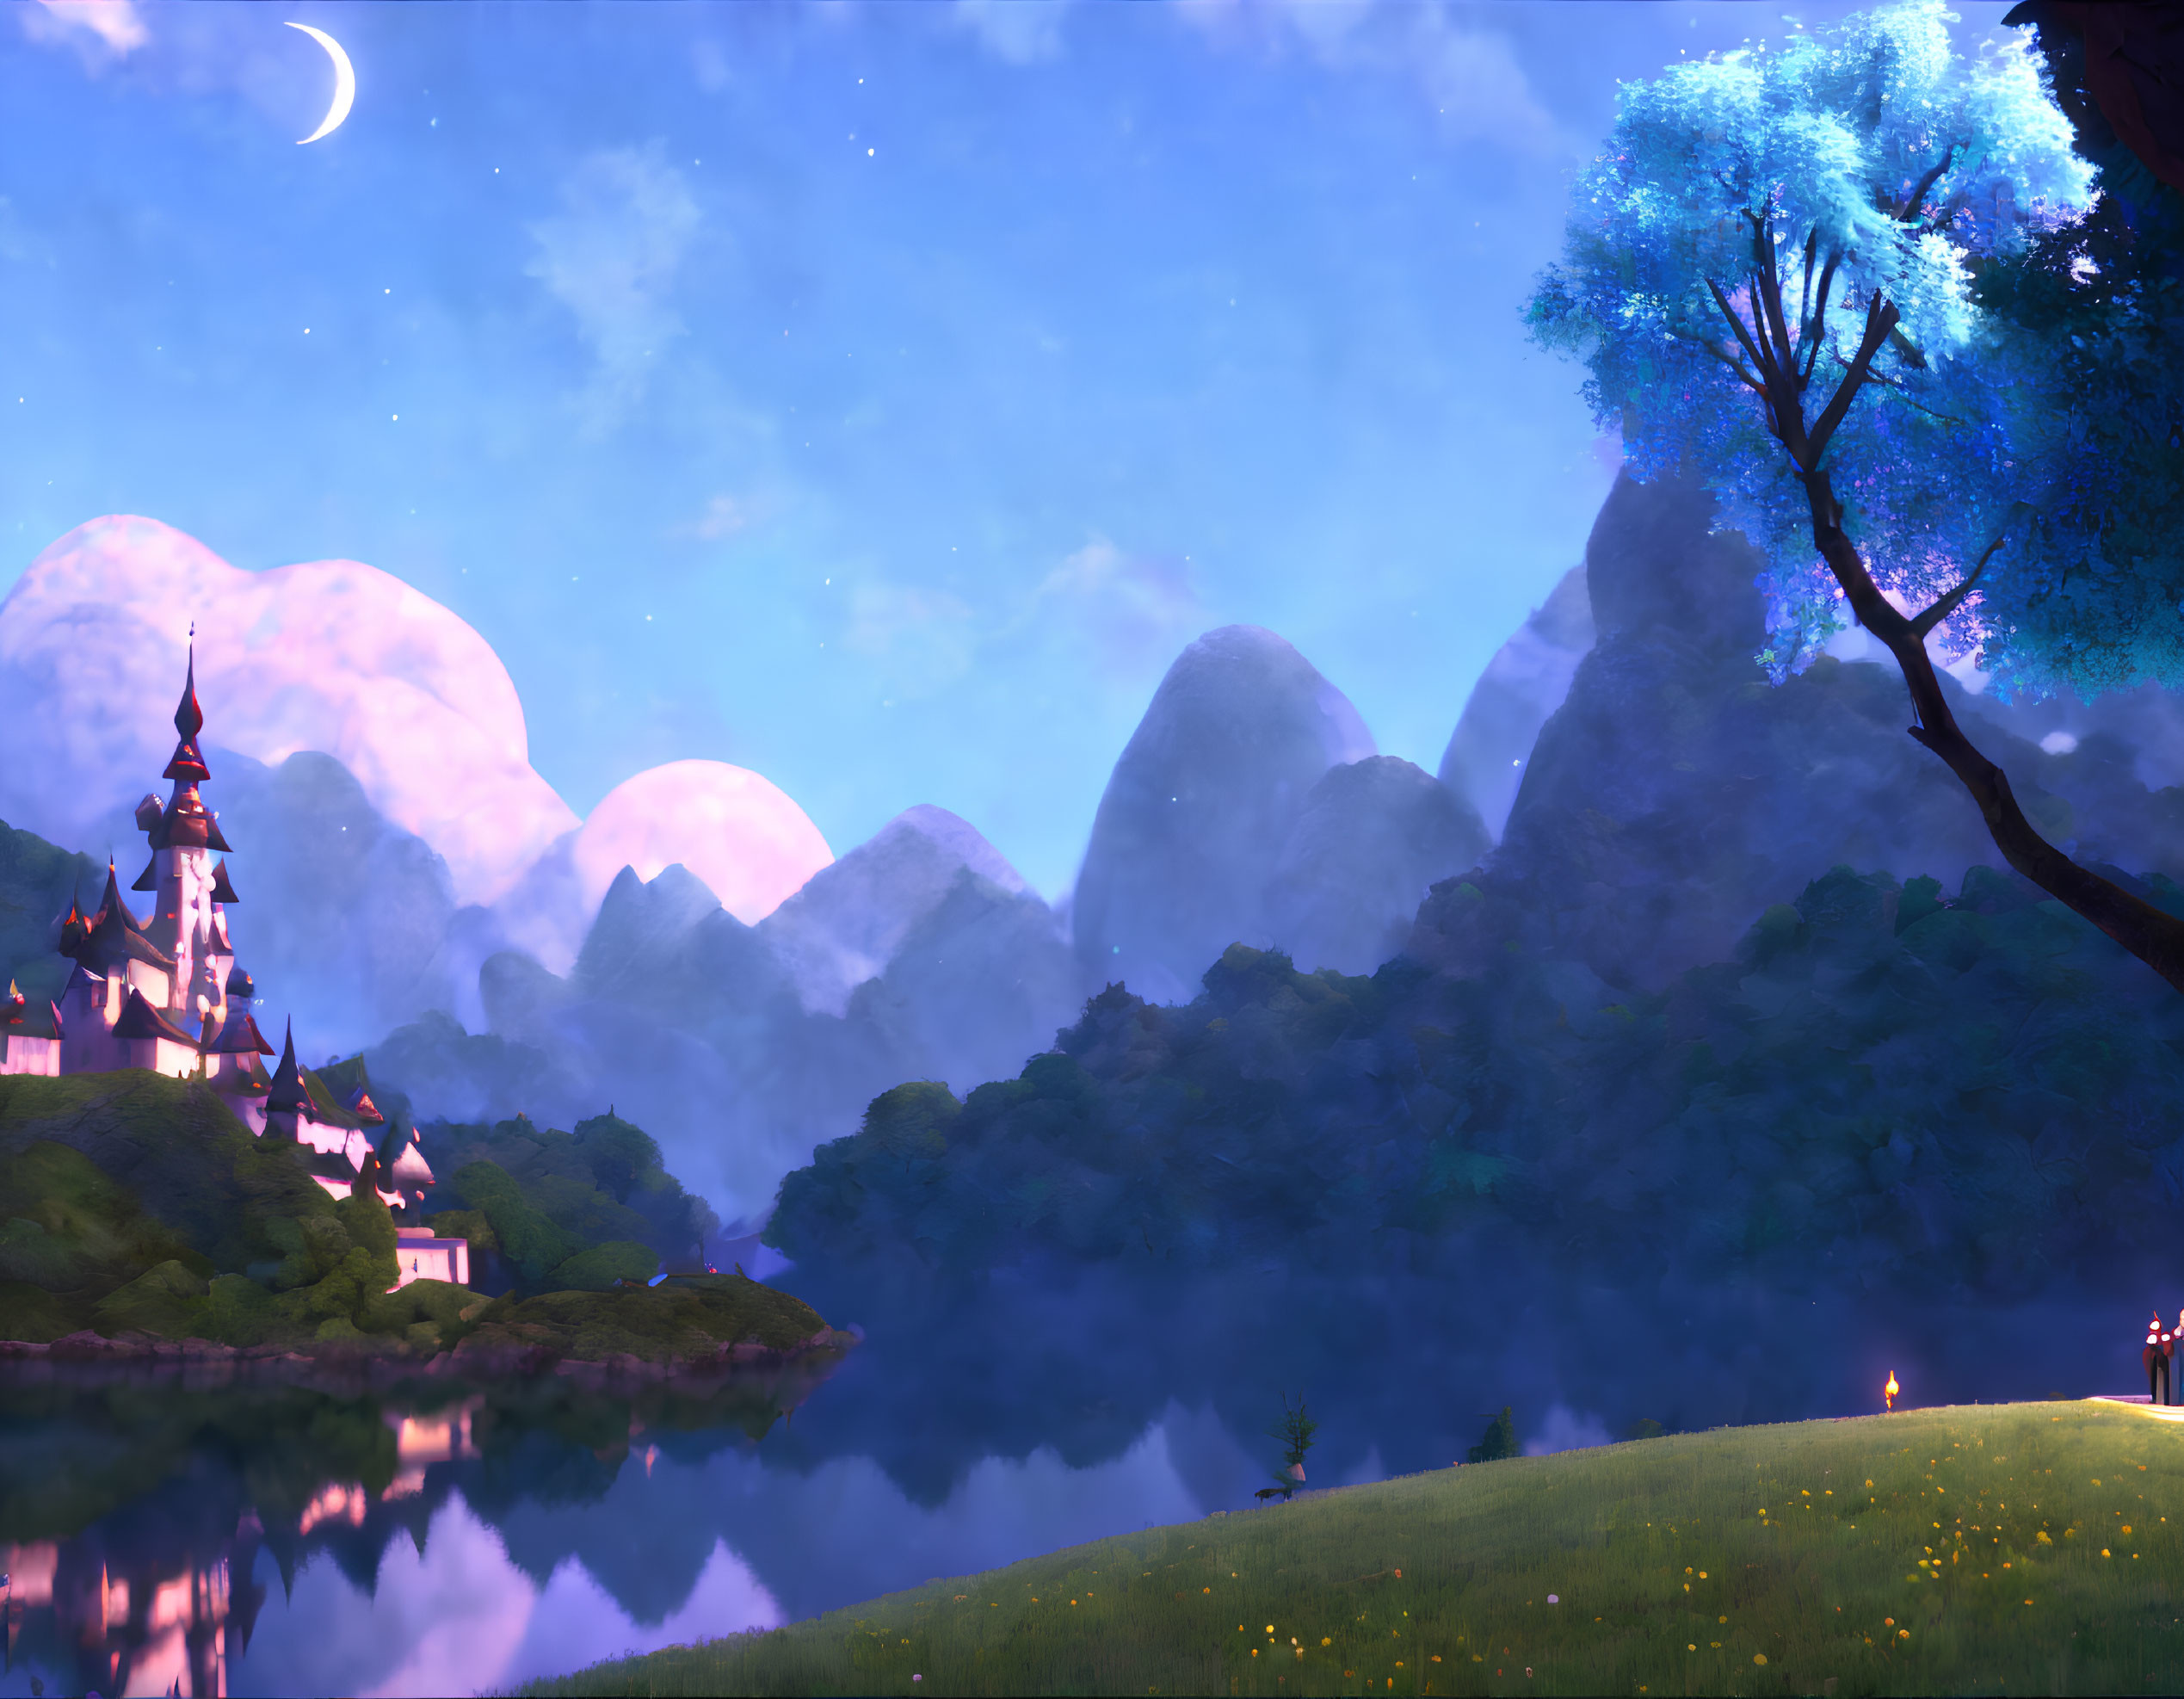 Nighttime animated castle scene by a reflective lake with mountains and starry sky